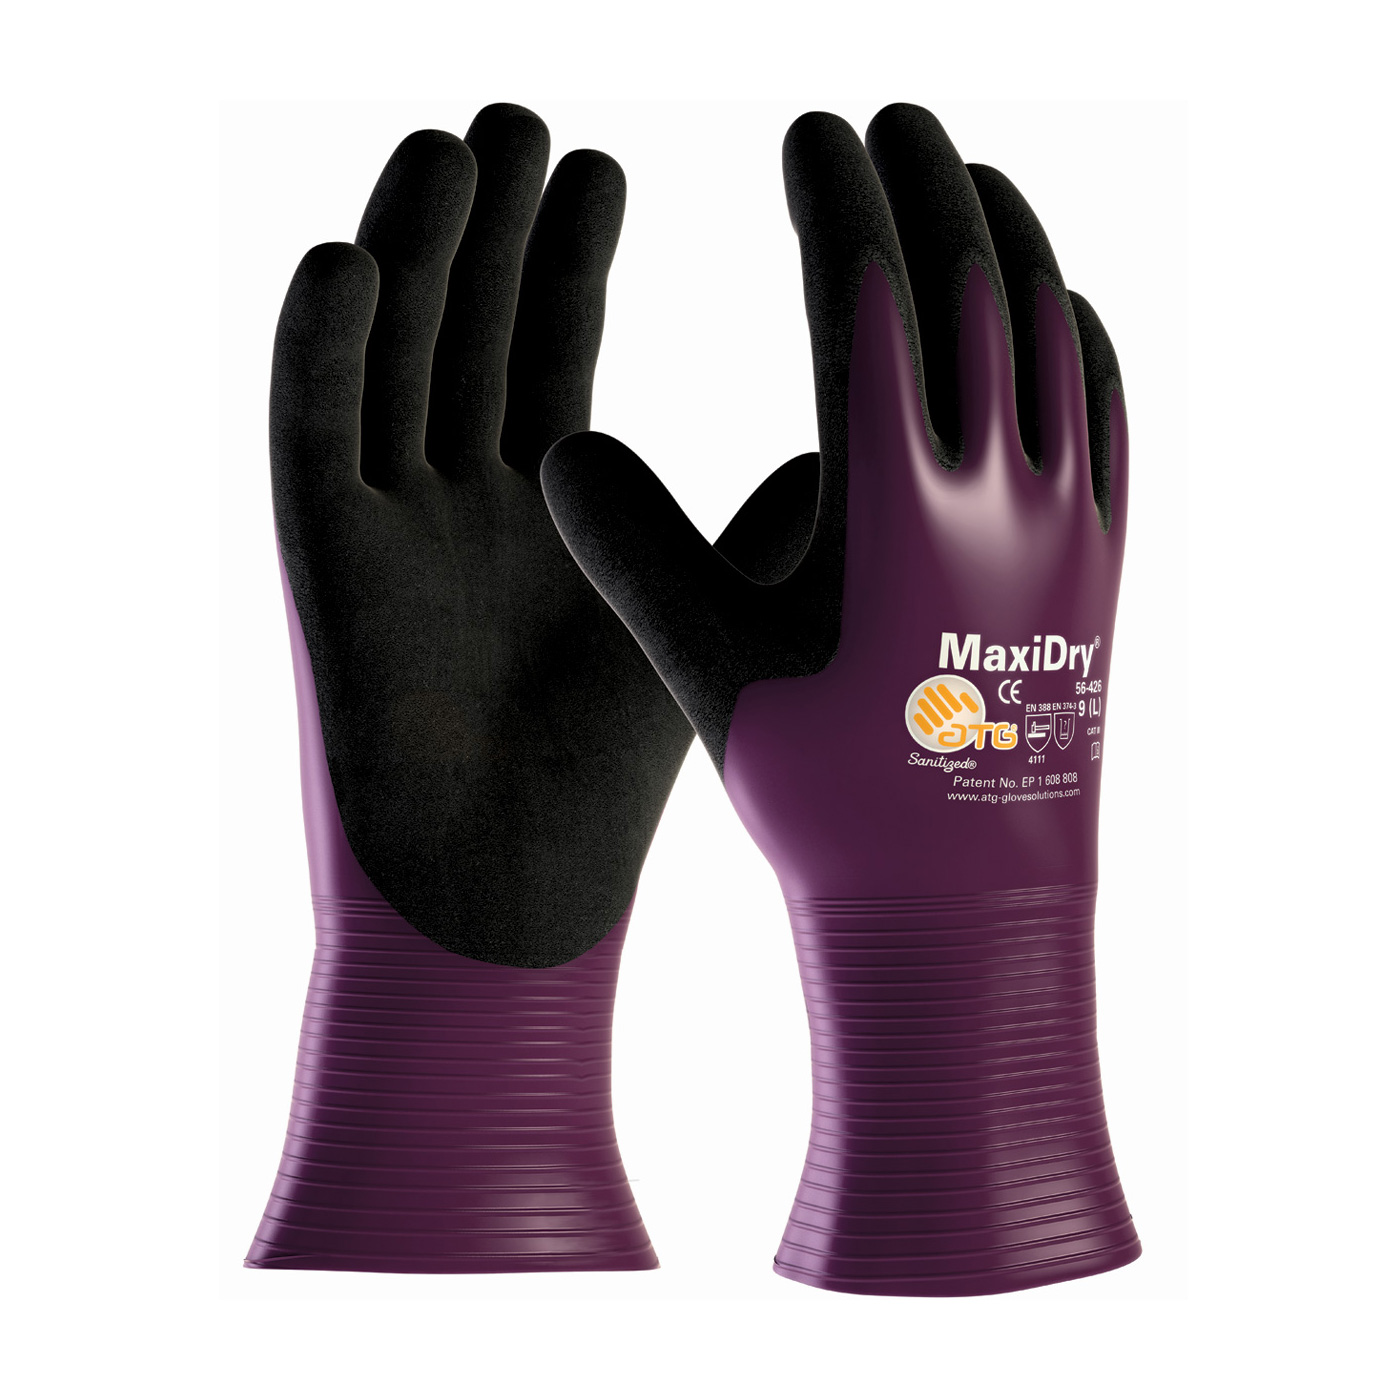 PIP® MaxiDry® Ultra Lightweight Nitrile Glove, Fully Dipped with Seamless Knit Nylon / Lycra Liner and Non-Slip Grip on Palm & Fingers #56-426